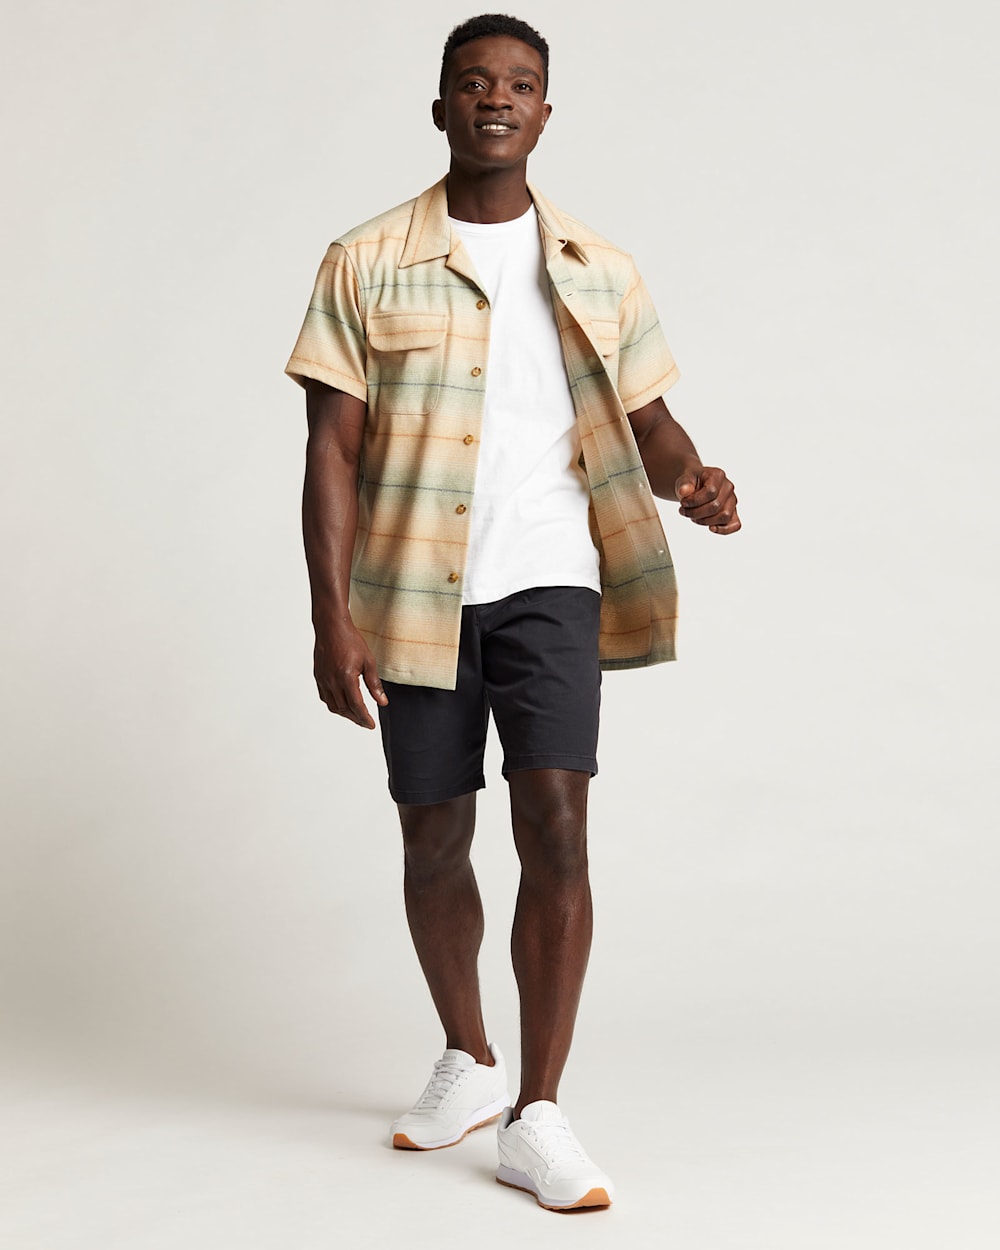 ALTERNATE VIEW OF MEN'S STRIPED SHORT-SLEEVE BOARD SHIRT IN TAN/GREEN OMBRE STRIPE image number 5